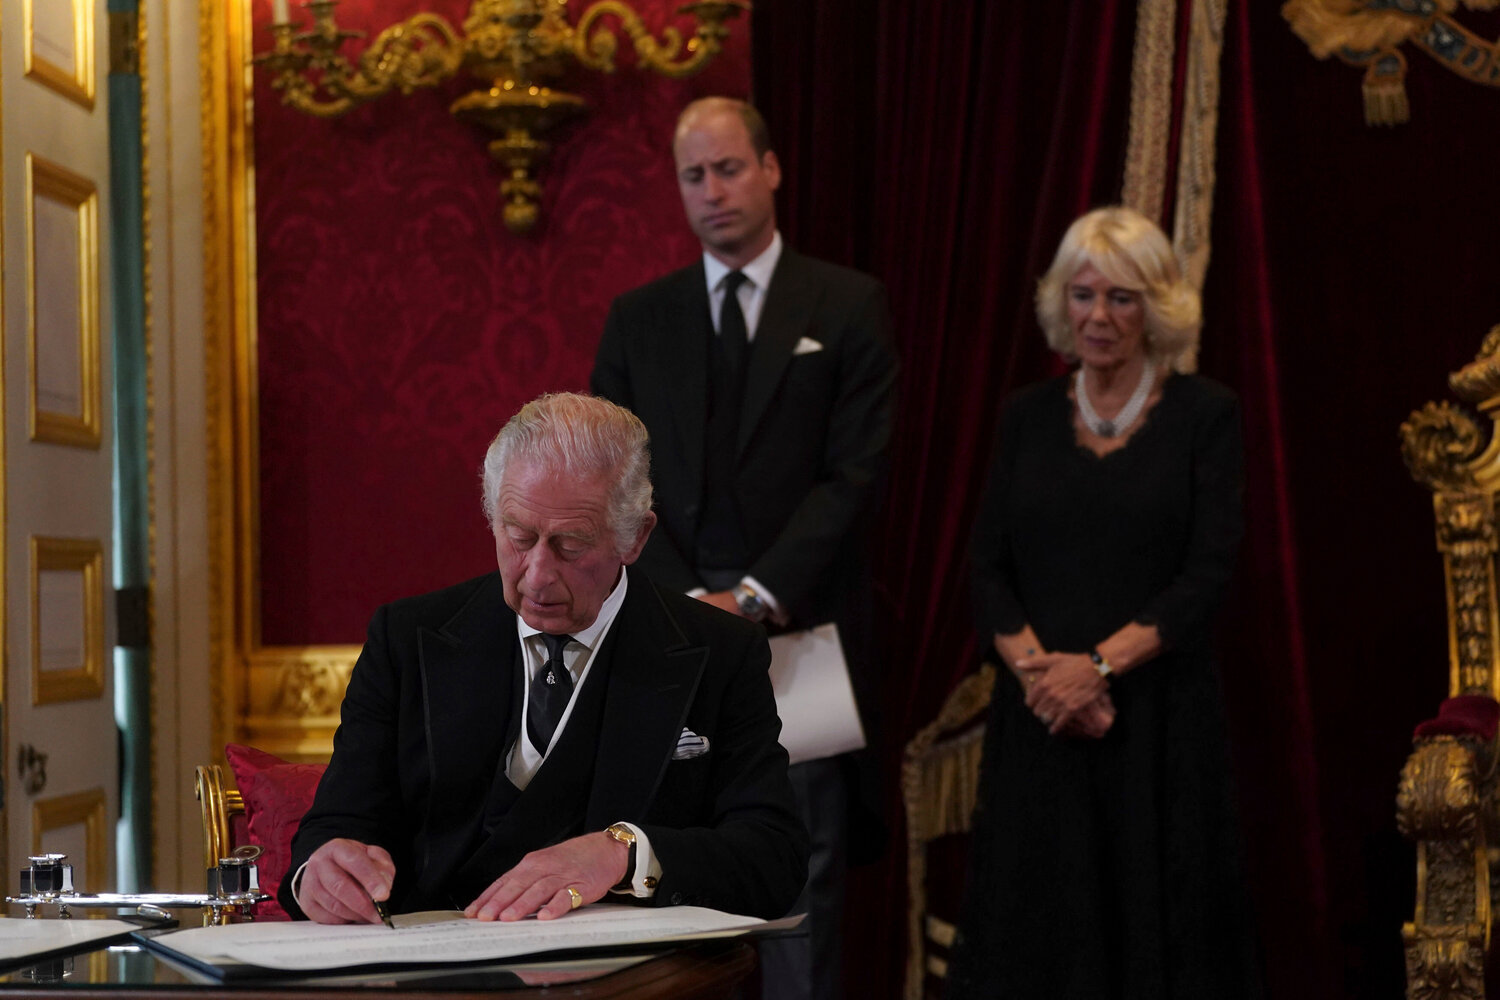 FILE - Britain's King Charles III signs an oath to uphold the security of the Church in Scotland during the Accession Council at St James's Palace, London, Saturday, Sept. 10, 2022, where he was formally proclaimed monarch. Charles automatically ascended to the throne when Elizabeth died Sept. 8 and he was officially proclaimed Britainâs monarch two days later in an ascension ceremony broadcast for the first time on television. (Victoria Jones/Pool Photo via AP, File)